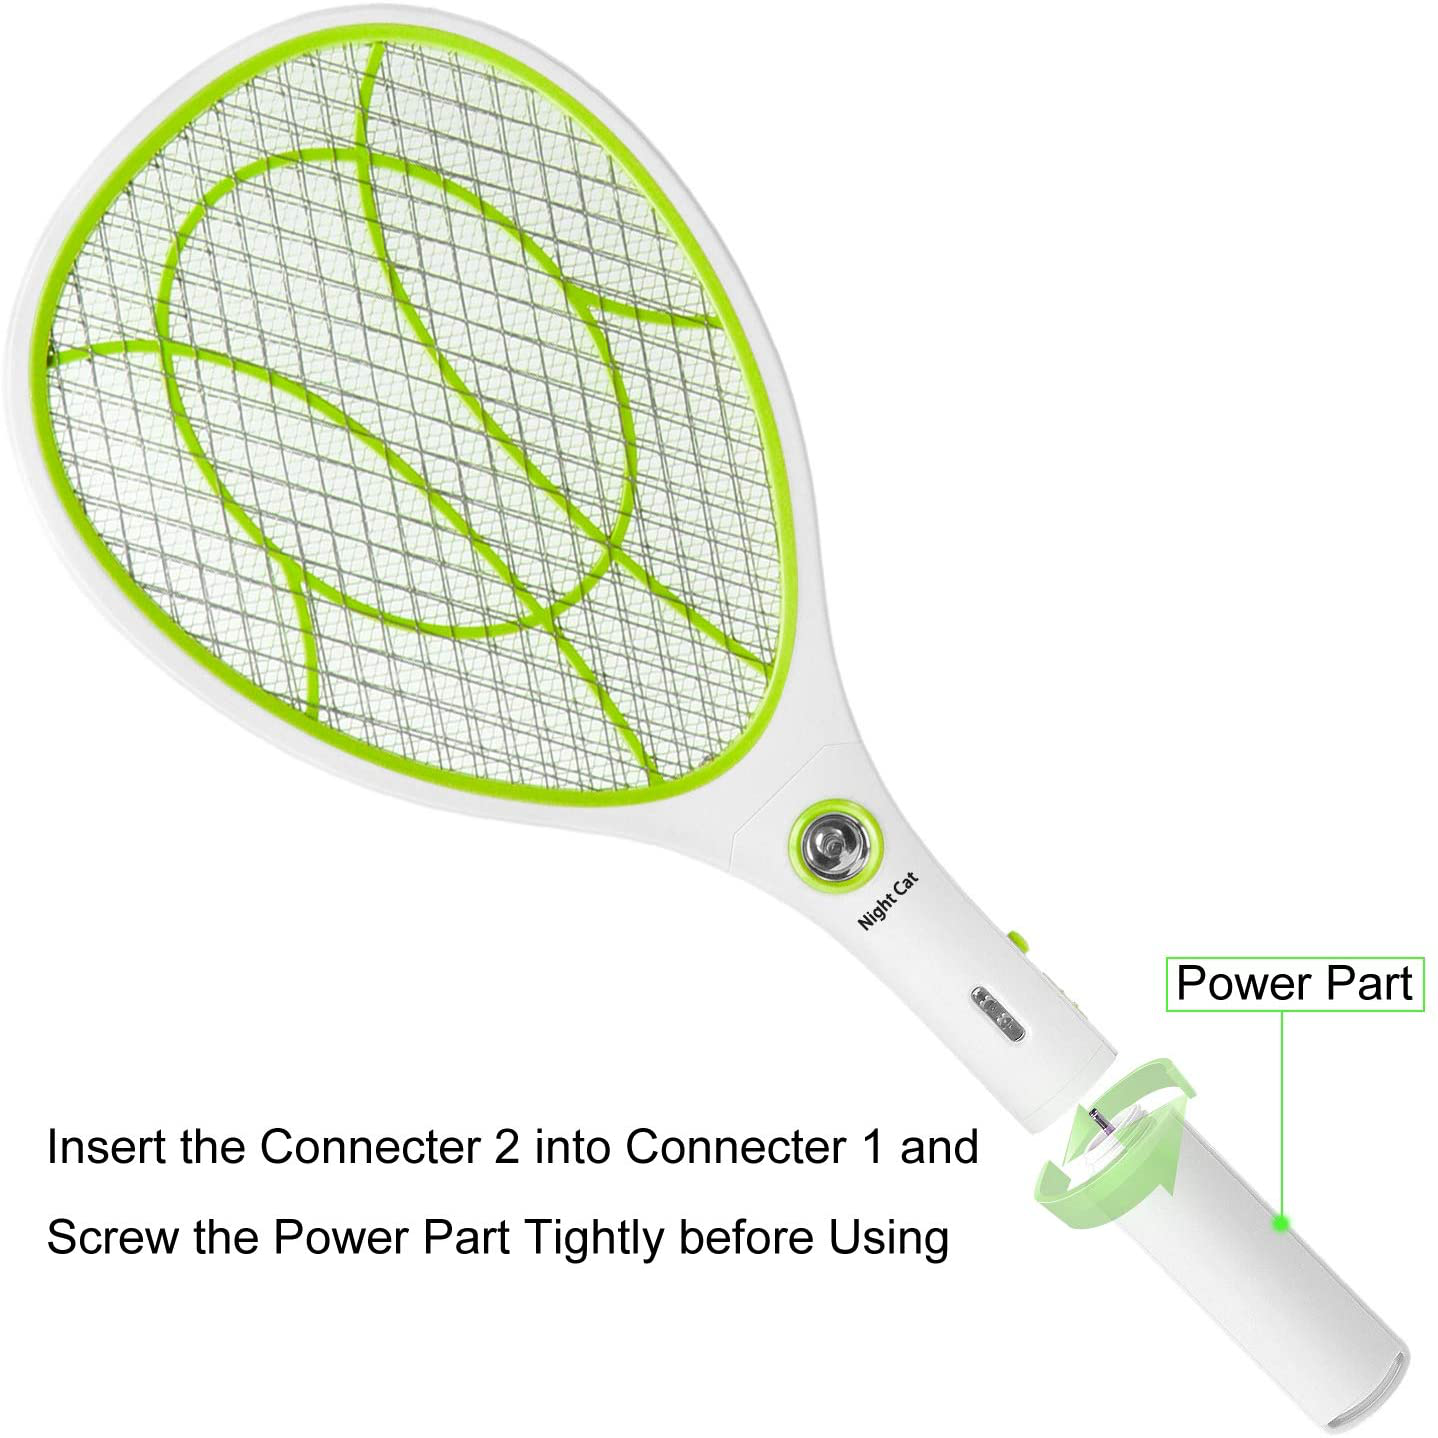 Night Cat Bug Zapper Racket Electric Fly Swatter Racquet Electronic Mosquito Killer with USB Charging LED Lighting Double Layer Protection Detachable Handle